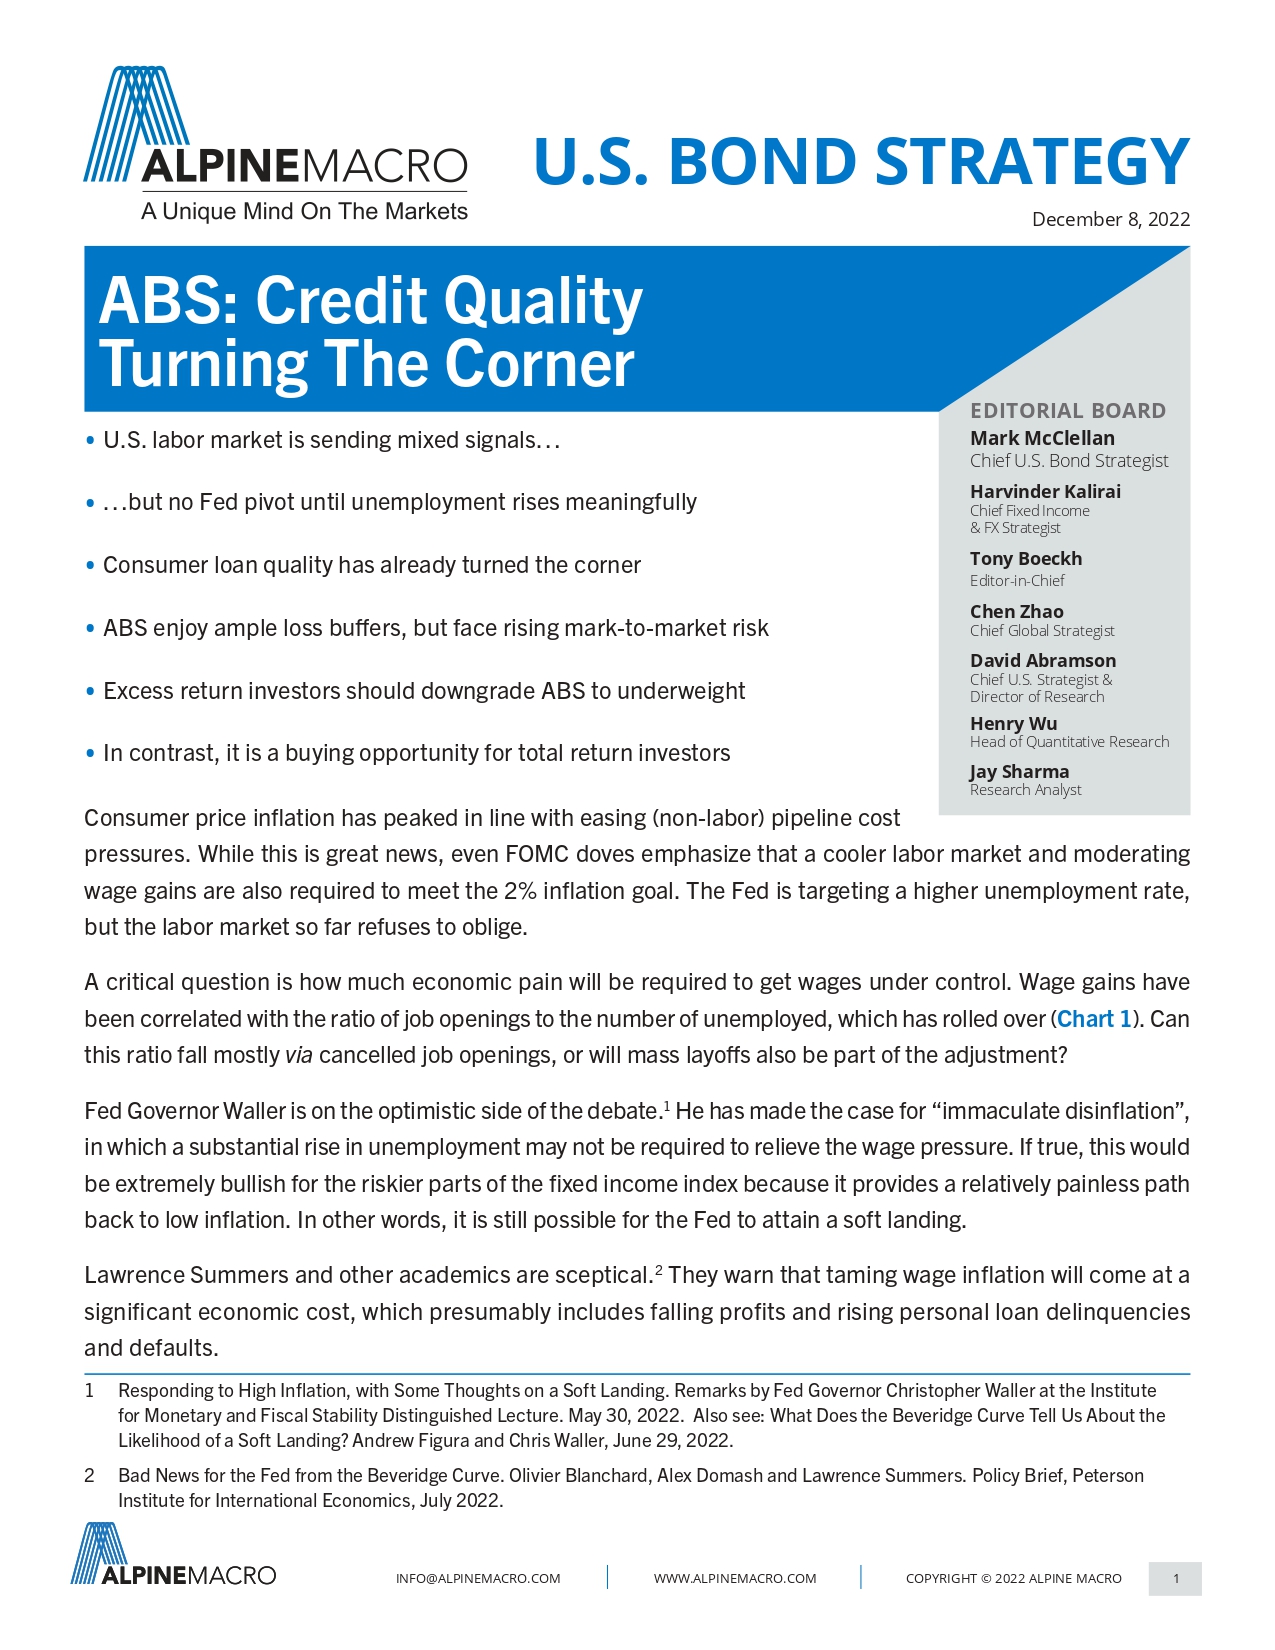 ABS: Credit Quality Turning The Corner